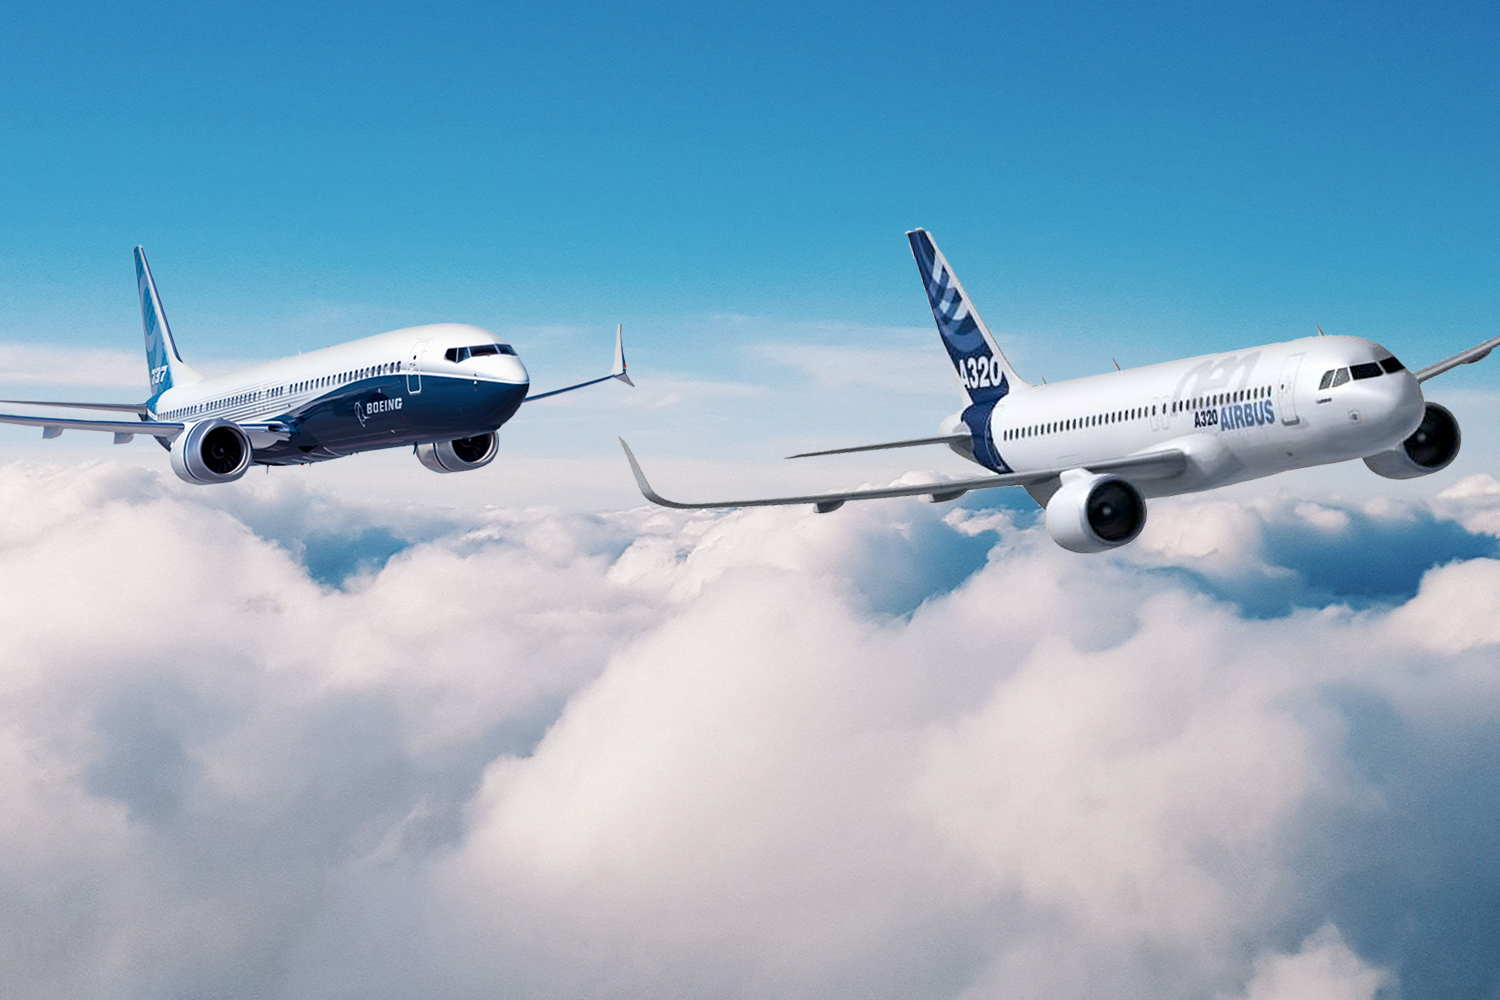 Boeing 737 Max Vs Airbus A320neo